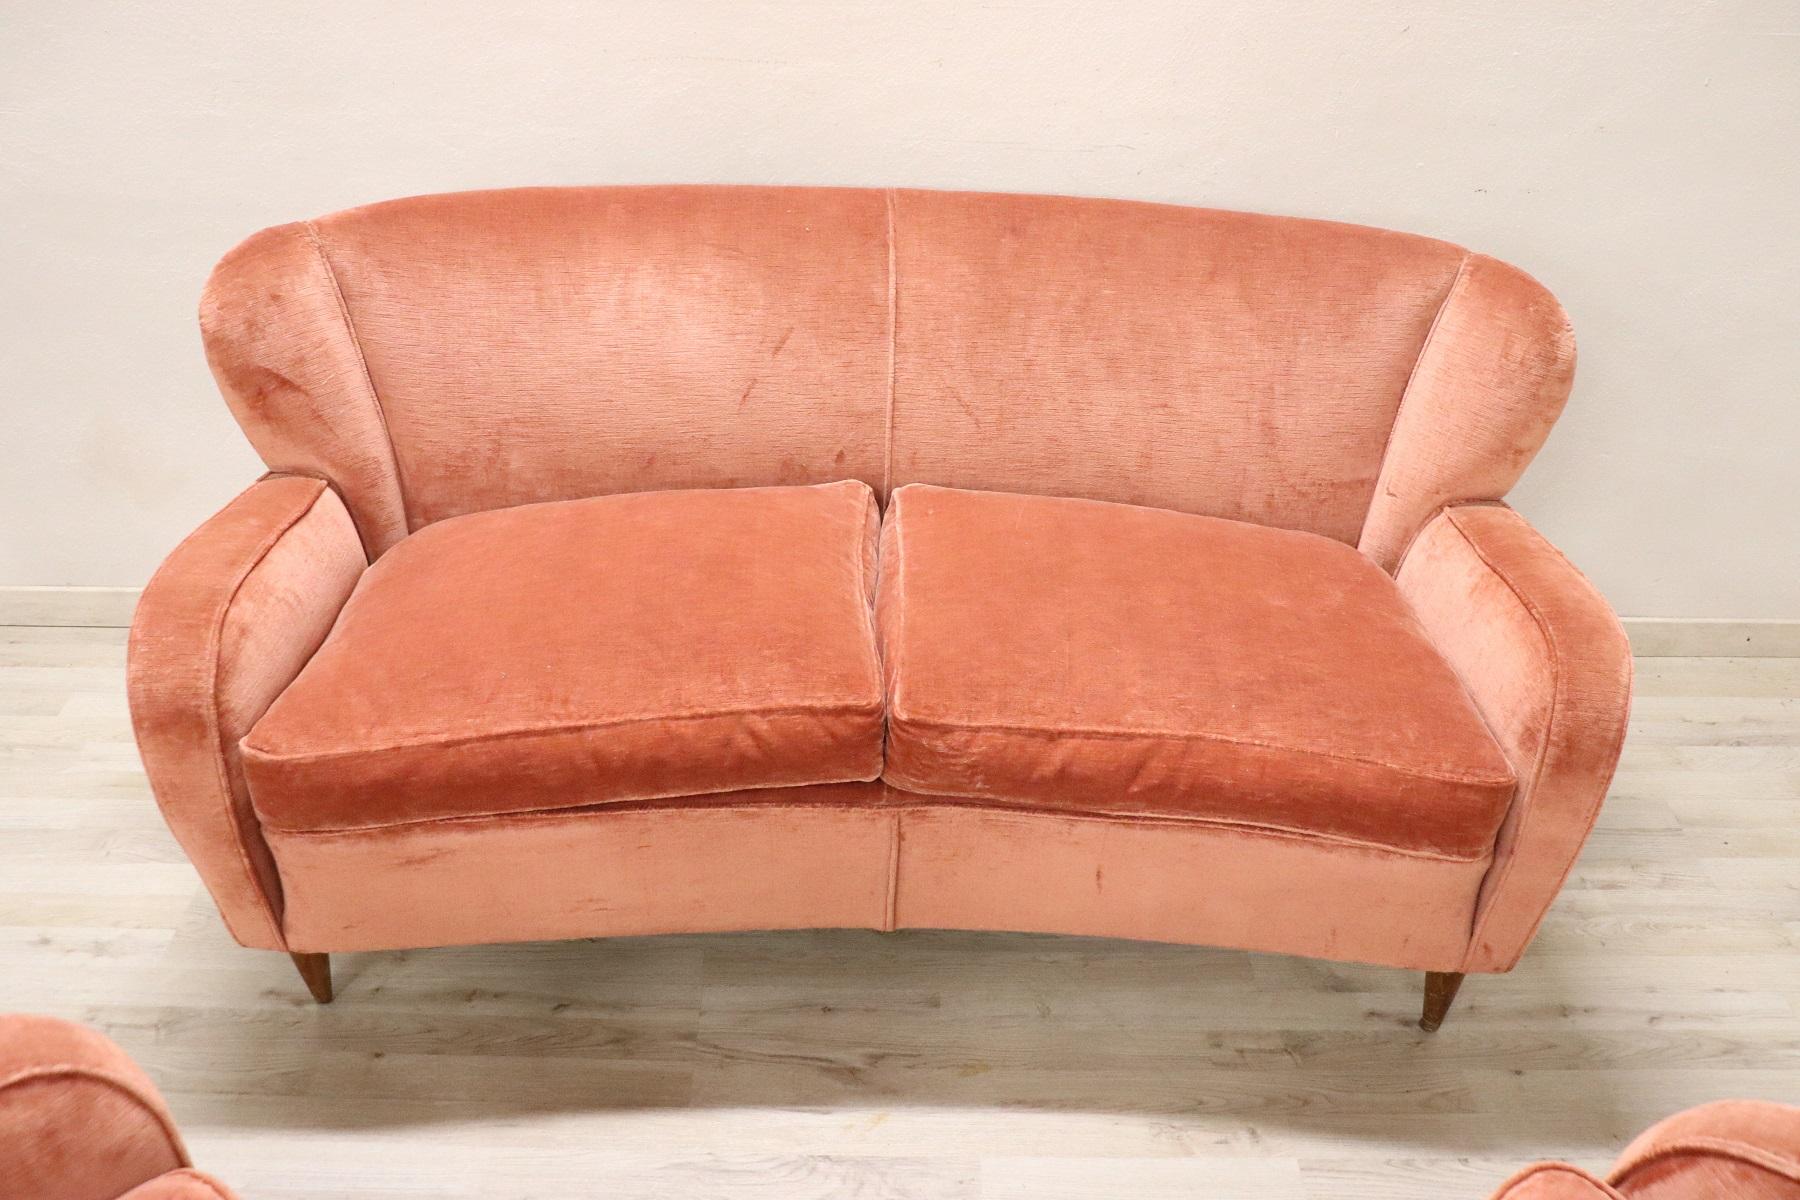 Rare complete Italian design 1970s living room set includes:
1 sofa
2 armchairs
Refined living room set in pink velvet with cushions filled with fine goose down. The living room comes from an important Italian villa and embellished the room for